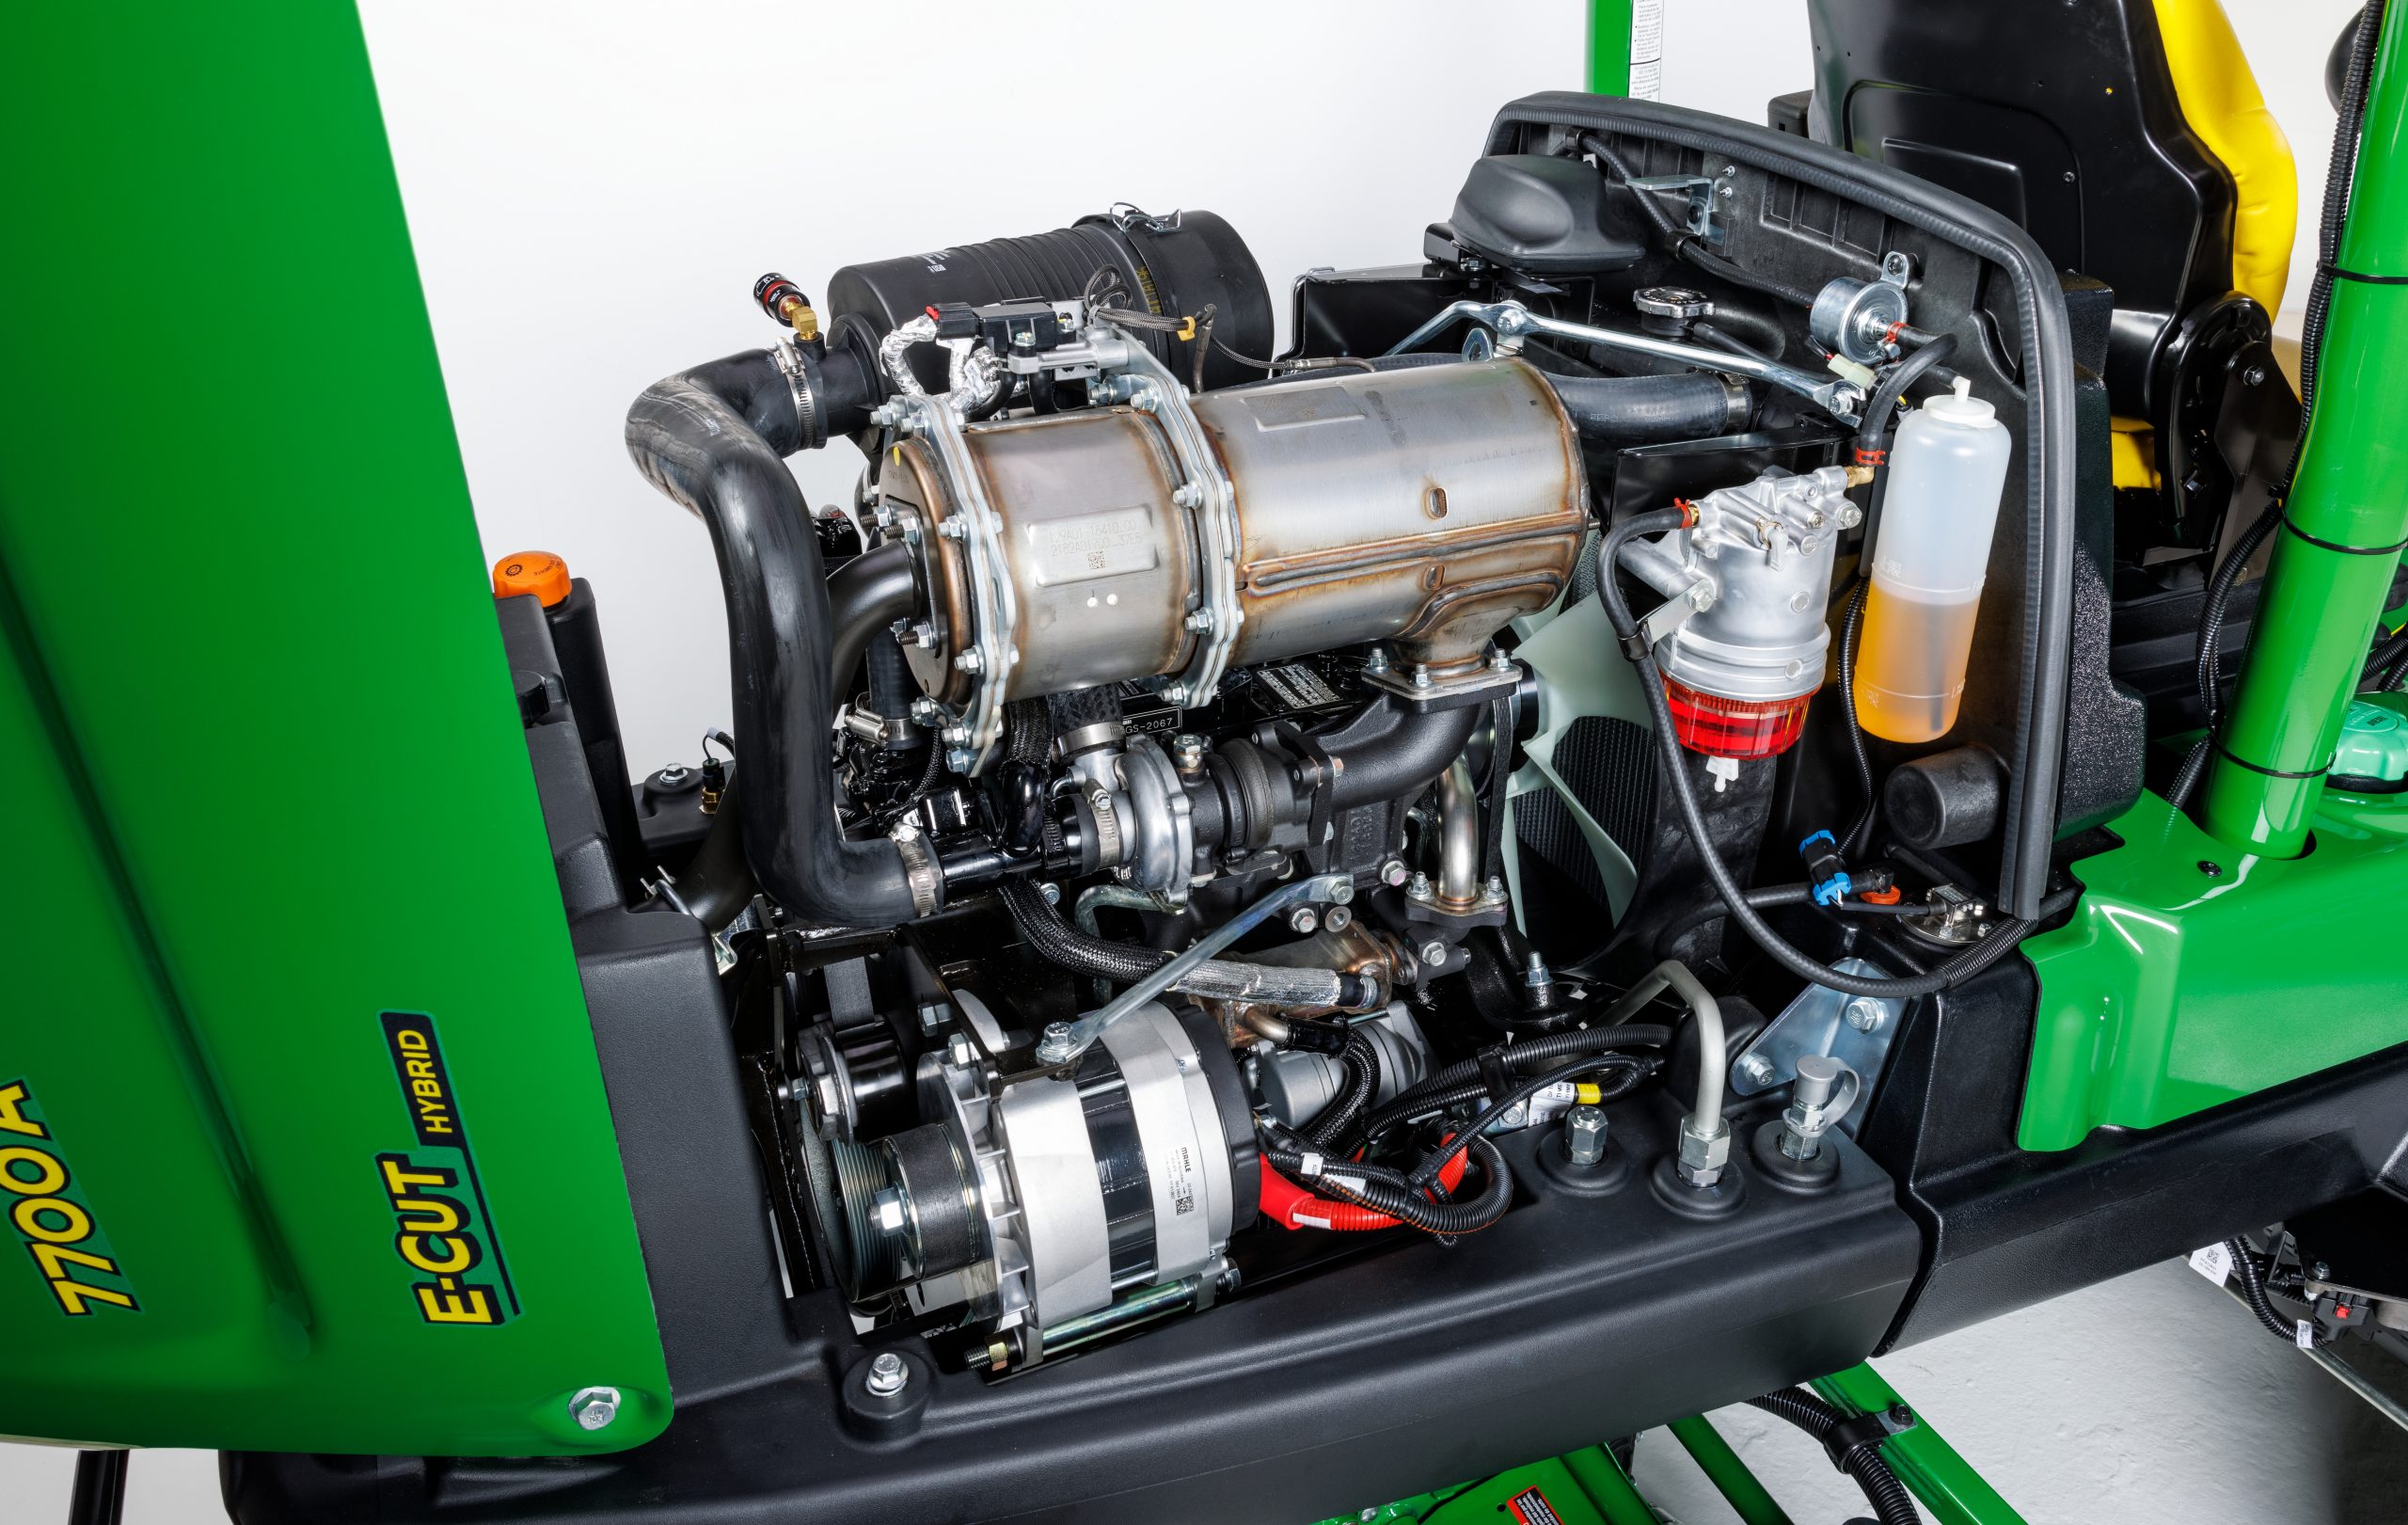 Close-up view of the engine on the 7700A E-Cut Hybrid fairway mower